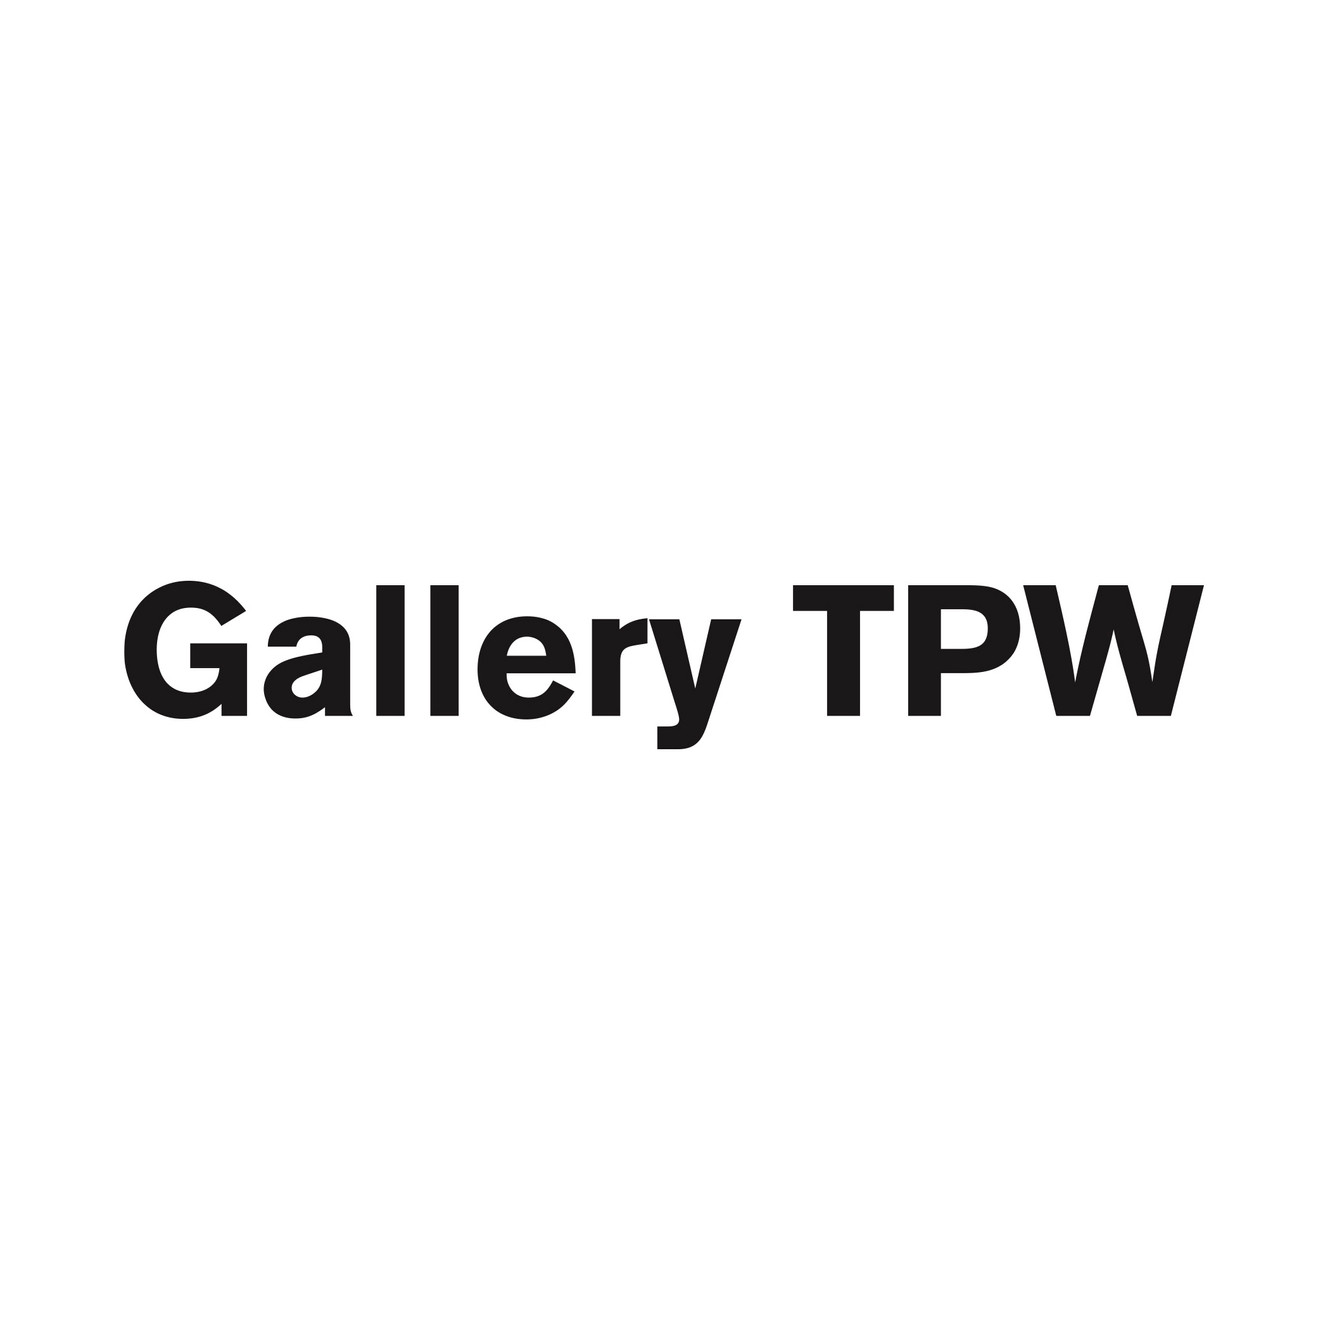 Gallery TPW